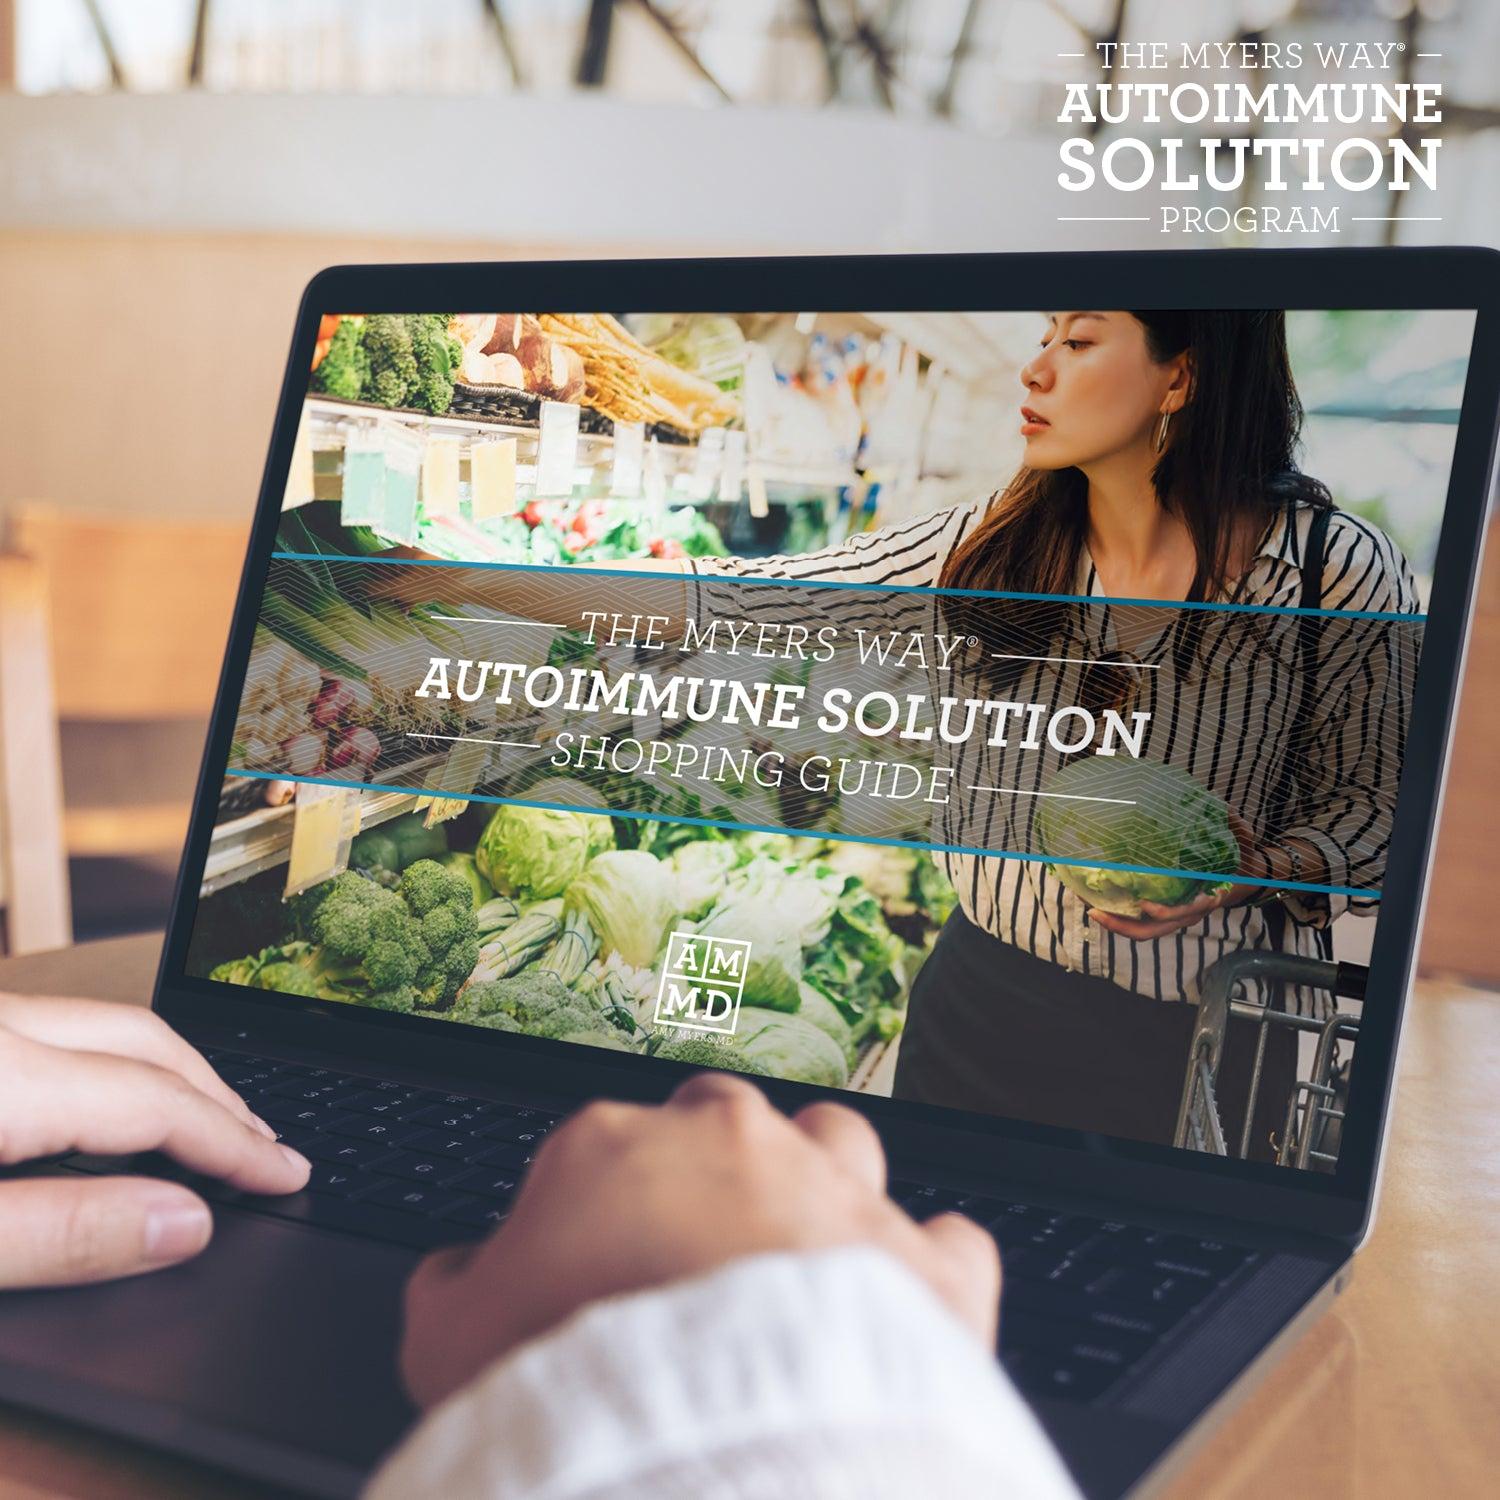 A Woman views The Autoimmune Solution Shopping Guide on a laptop computer - Amy Myers MD®